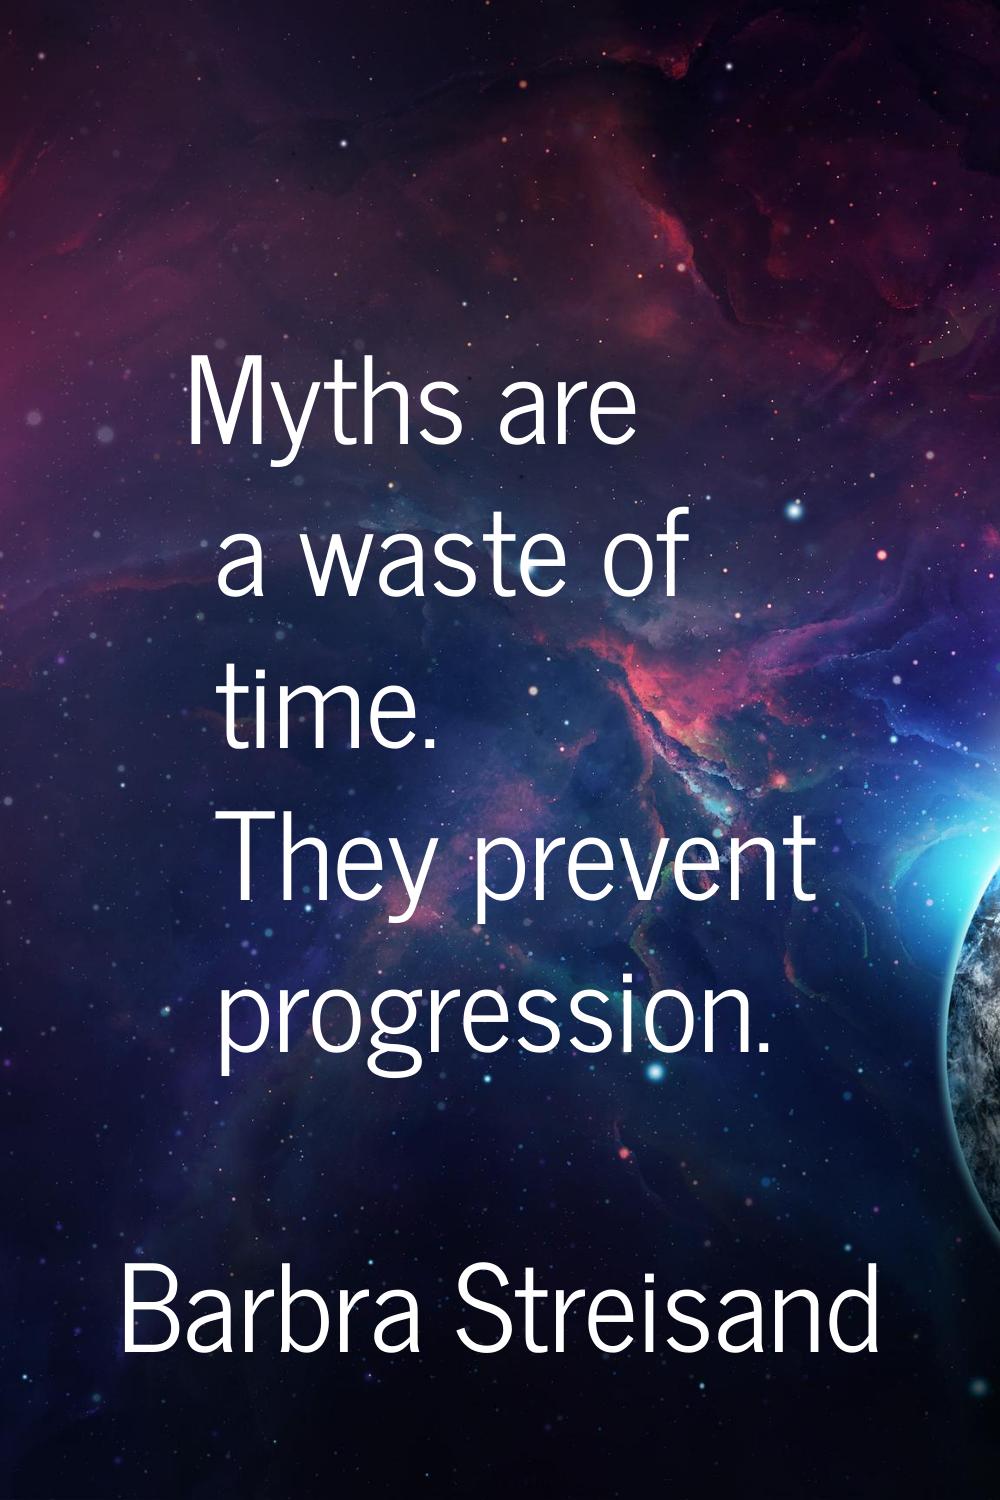 Myths are a waste of time. They prevent progression.